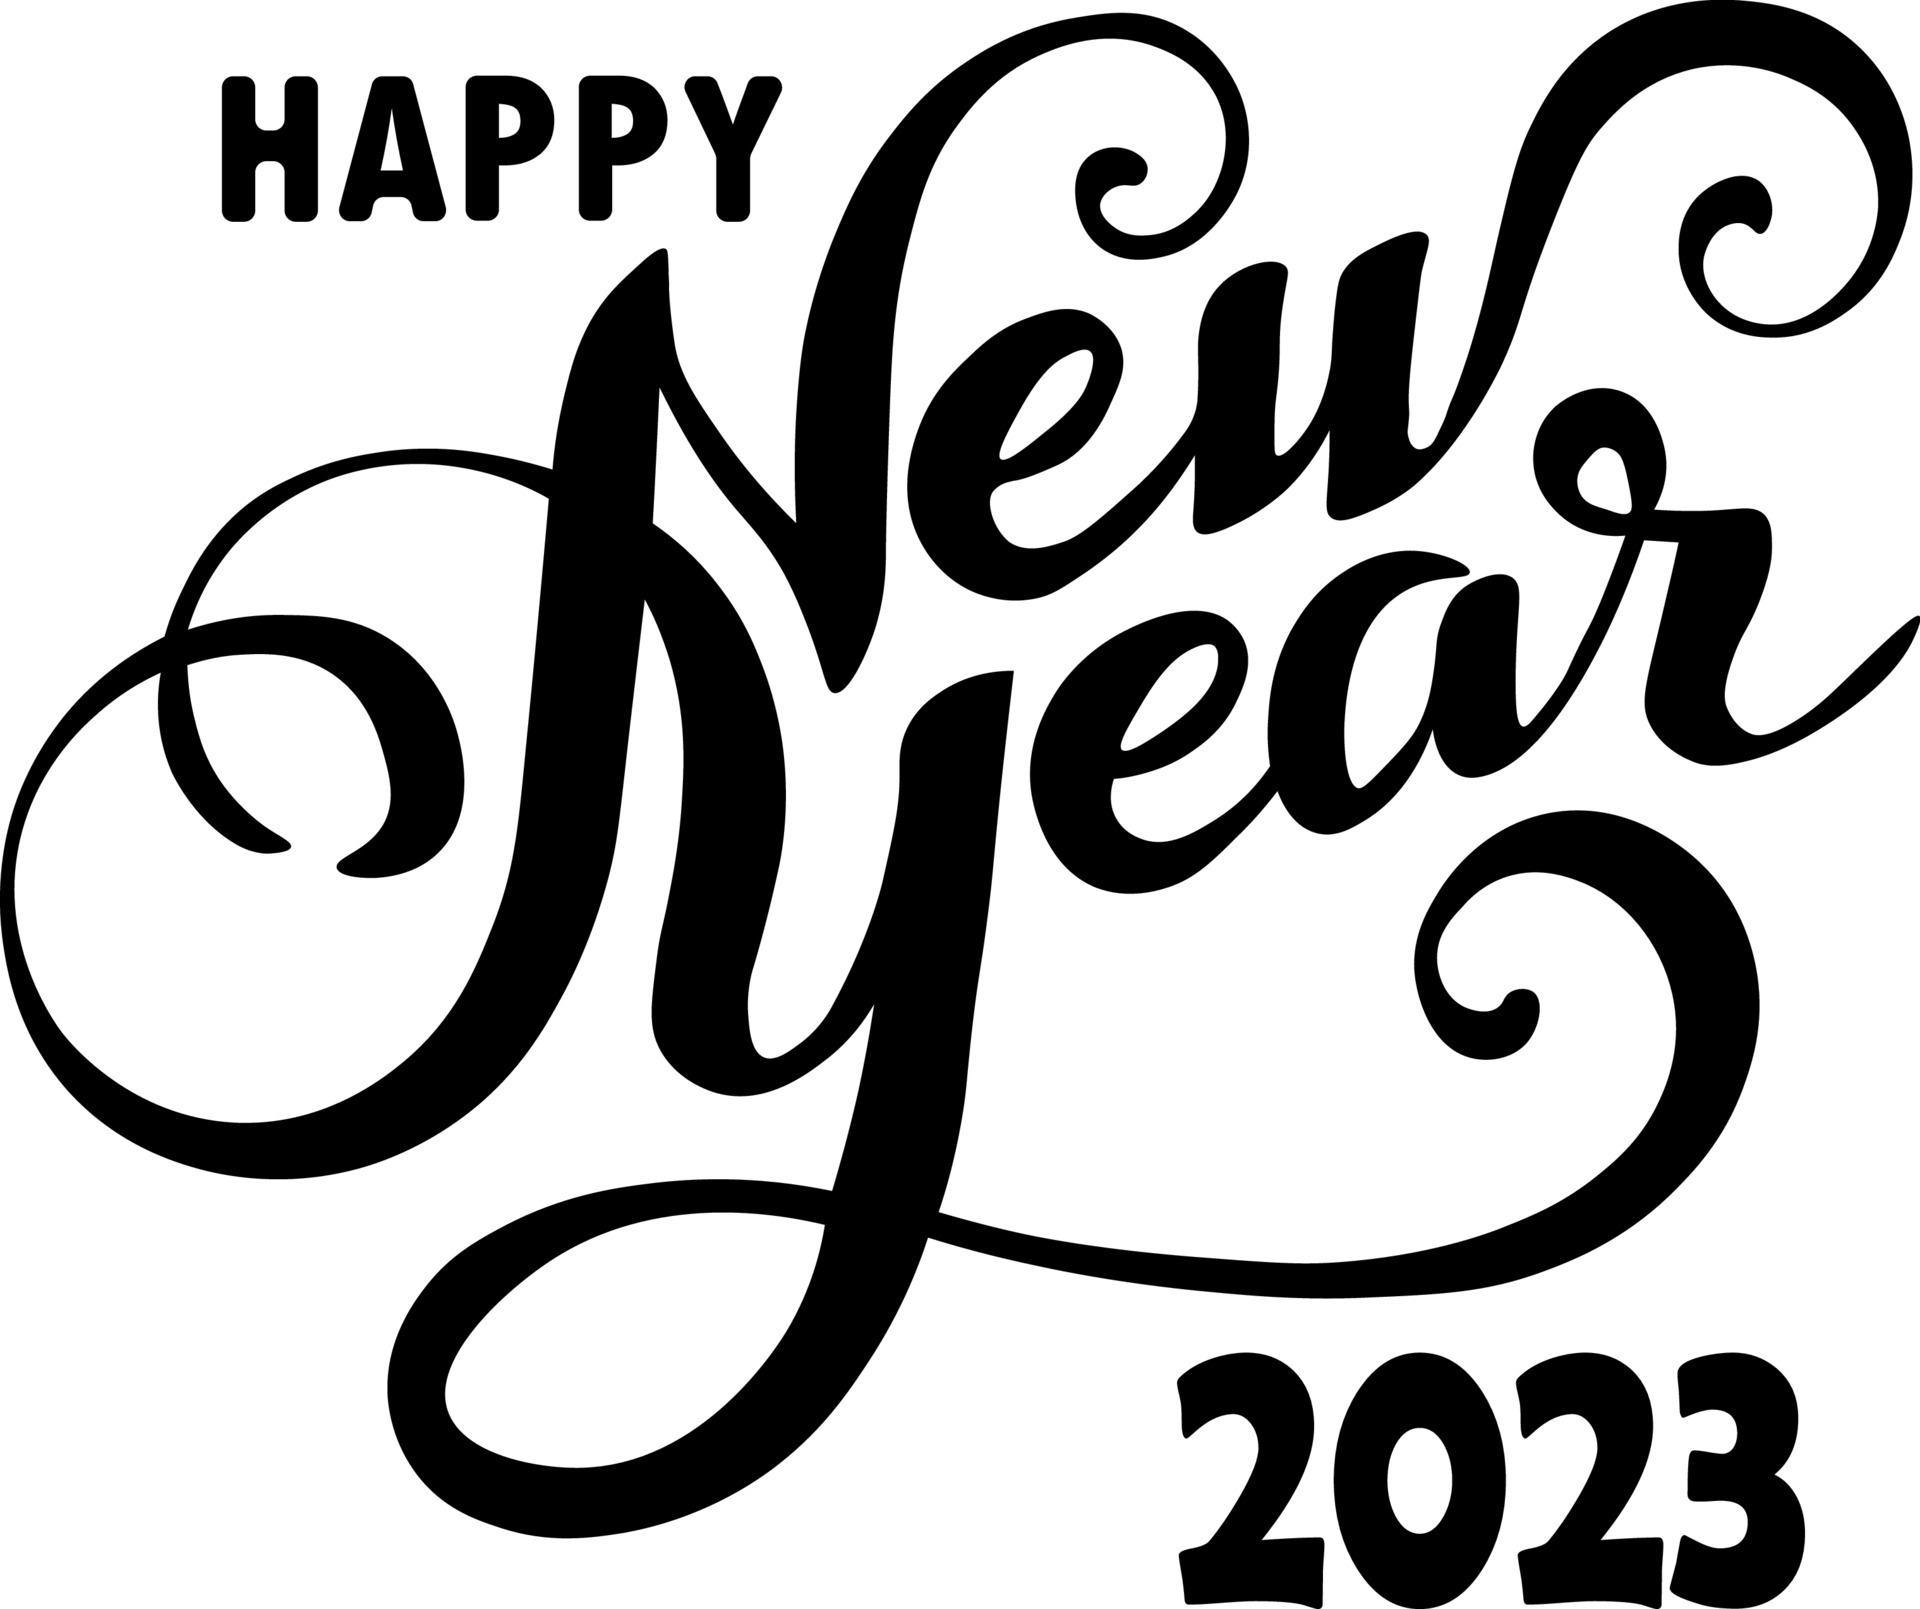 2023 Happy New Year text logo design. Number 2023 design template. 2023 ...